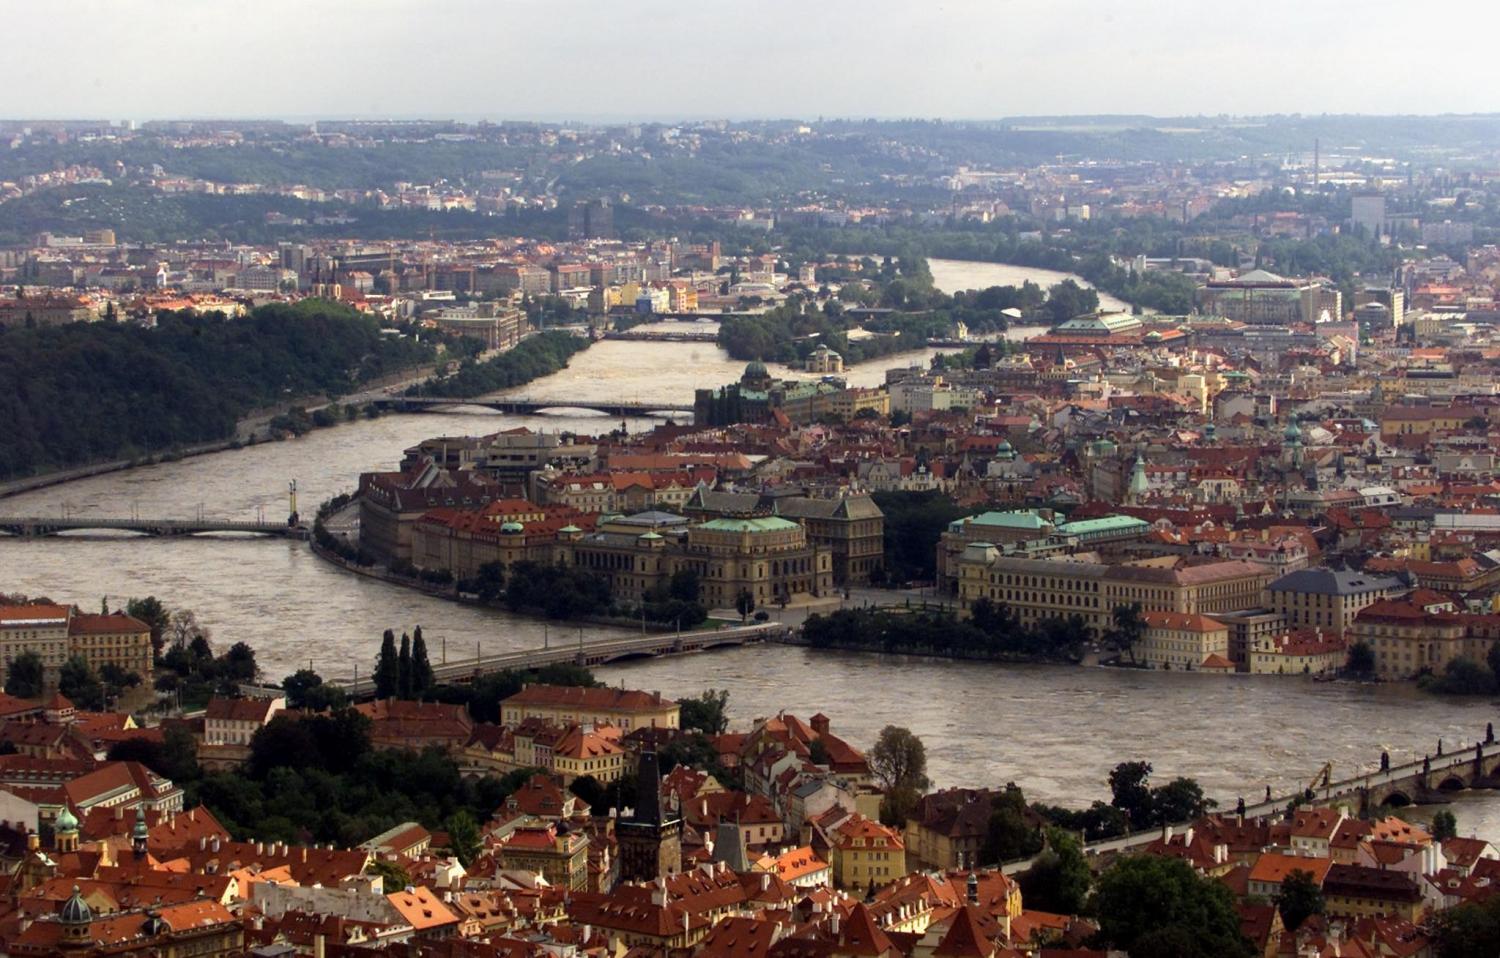 A general view of the Vltava river in Prague.